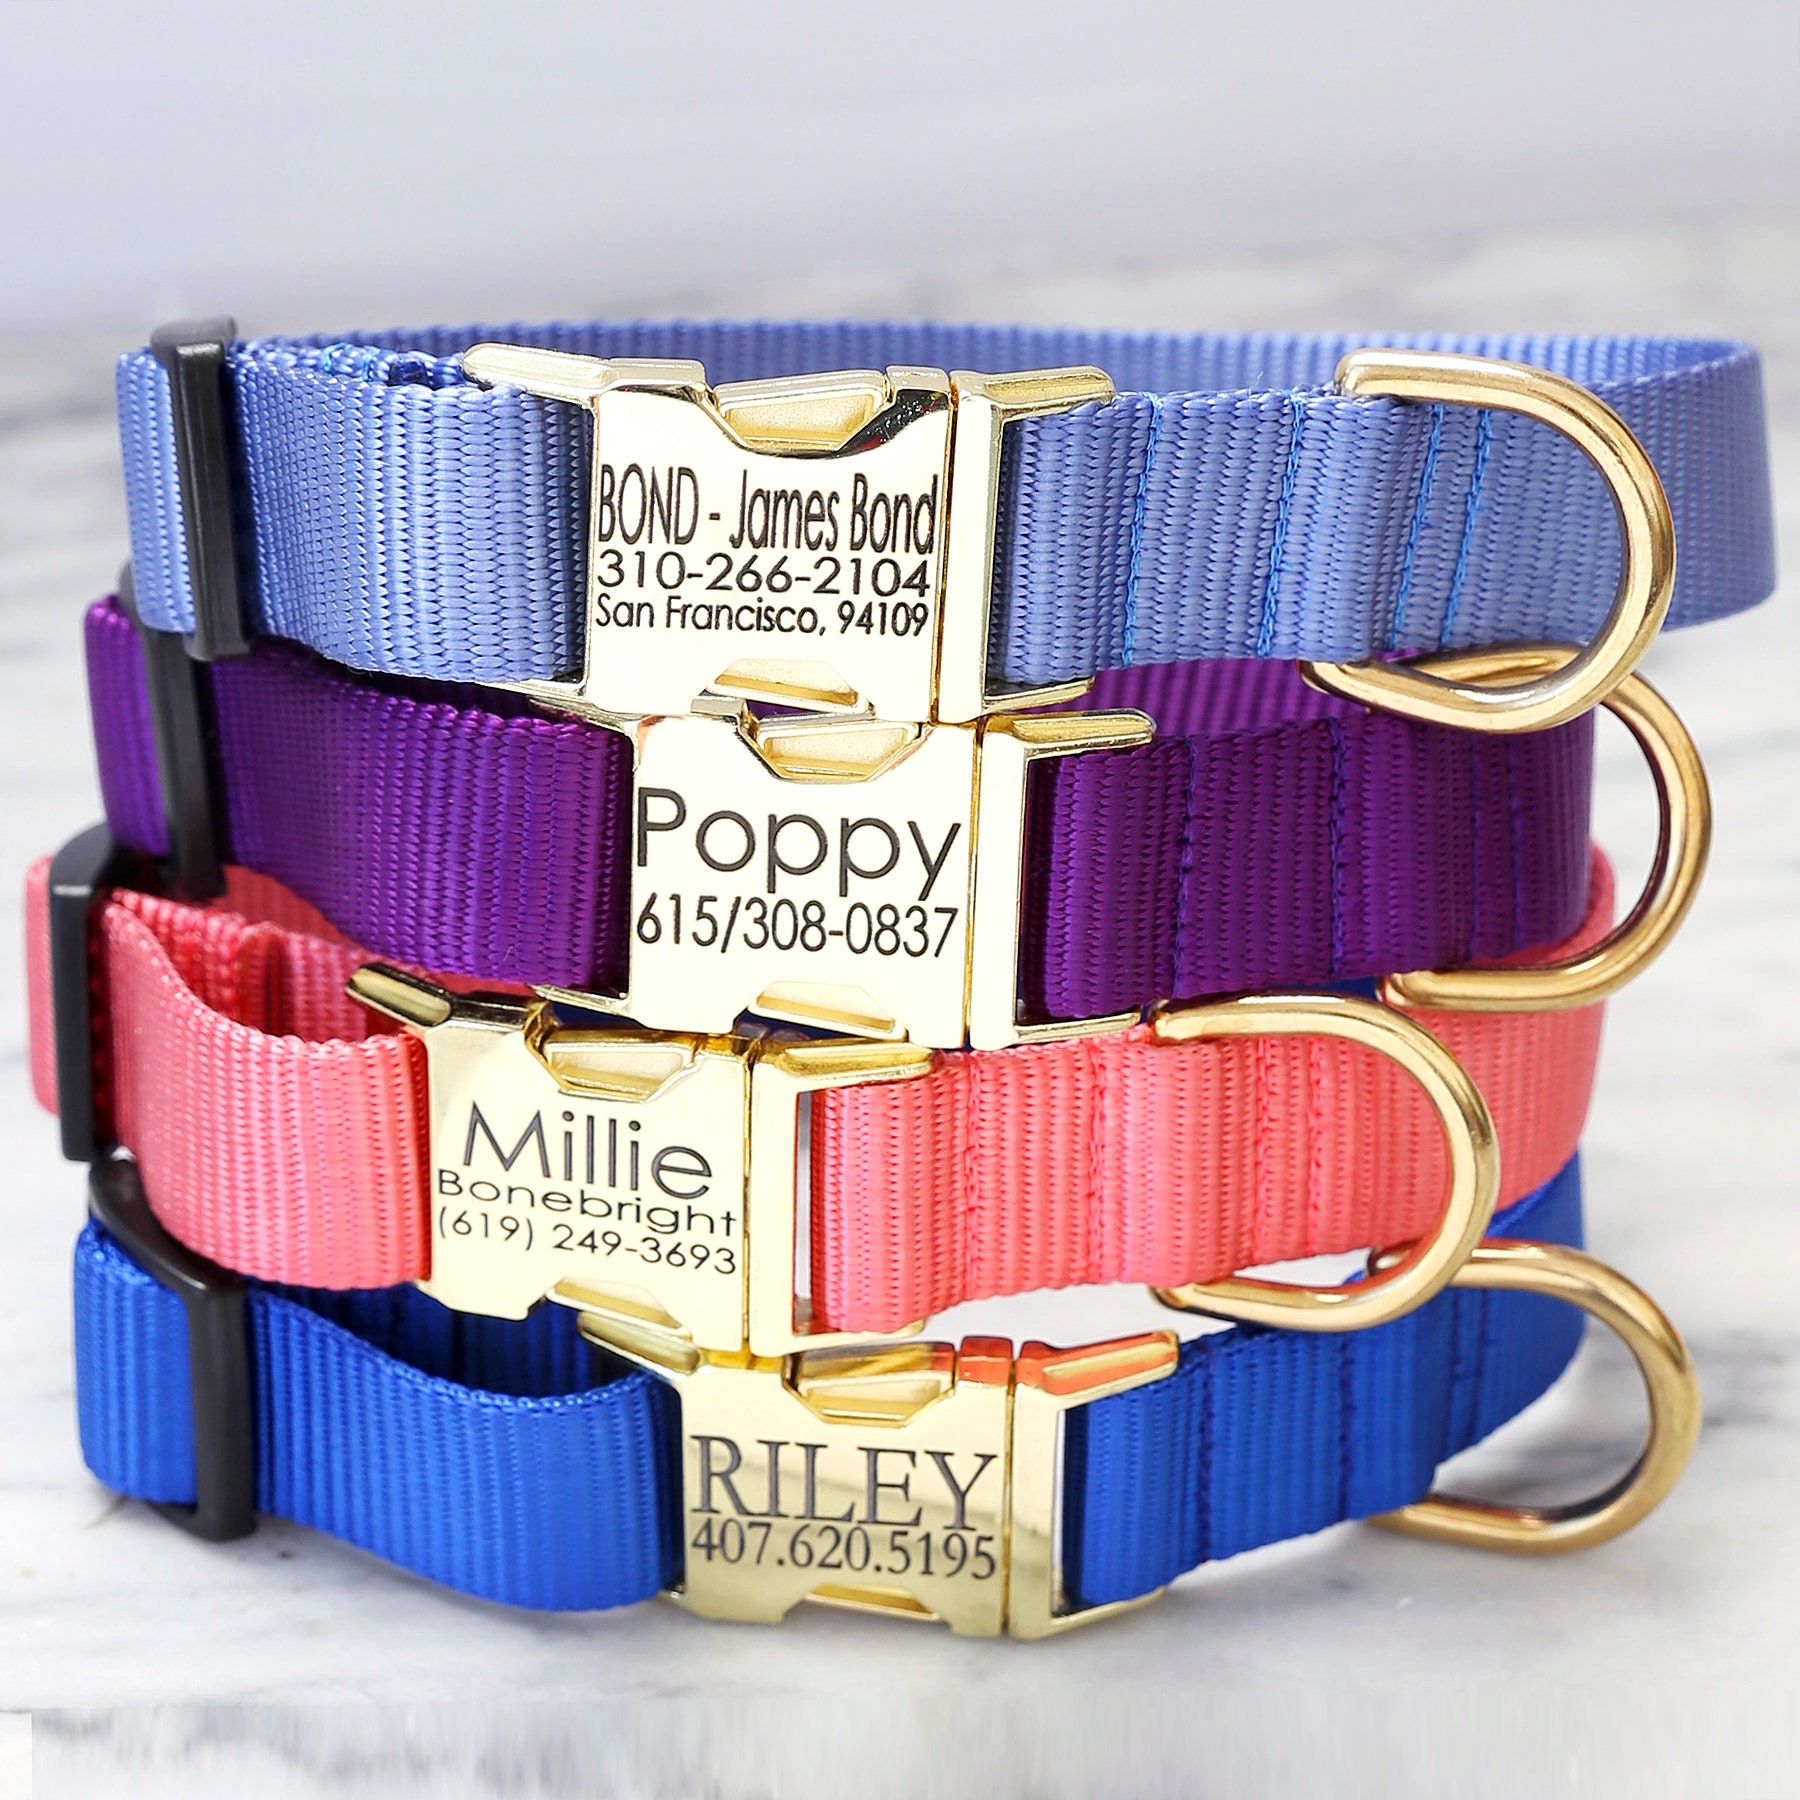 Are Buckle Dog Collars Safe